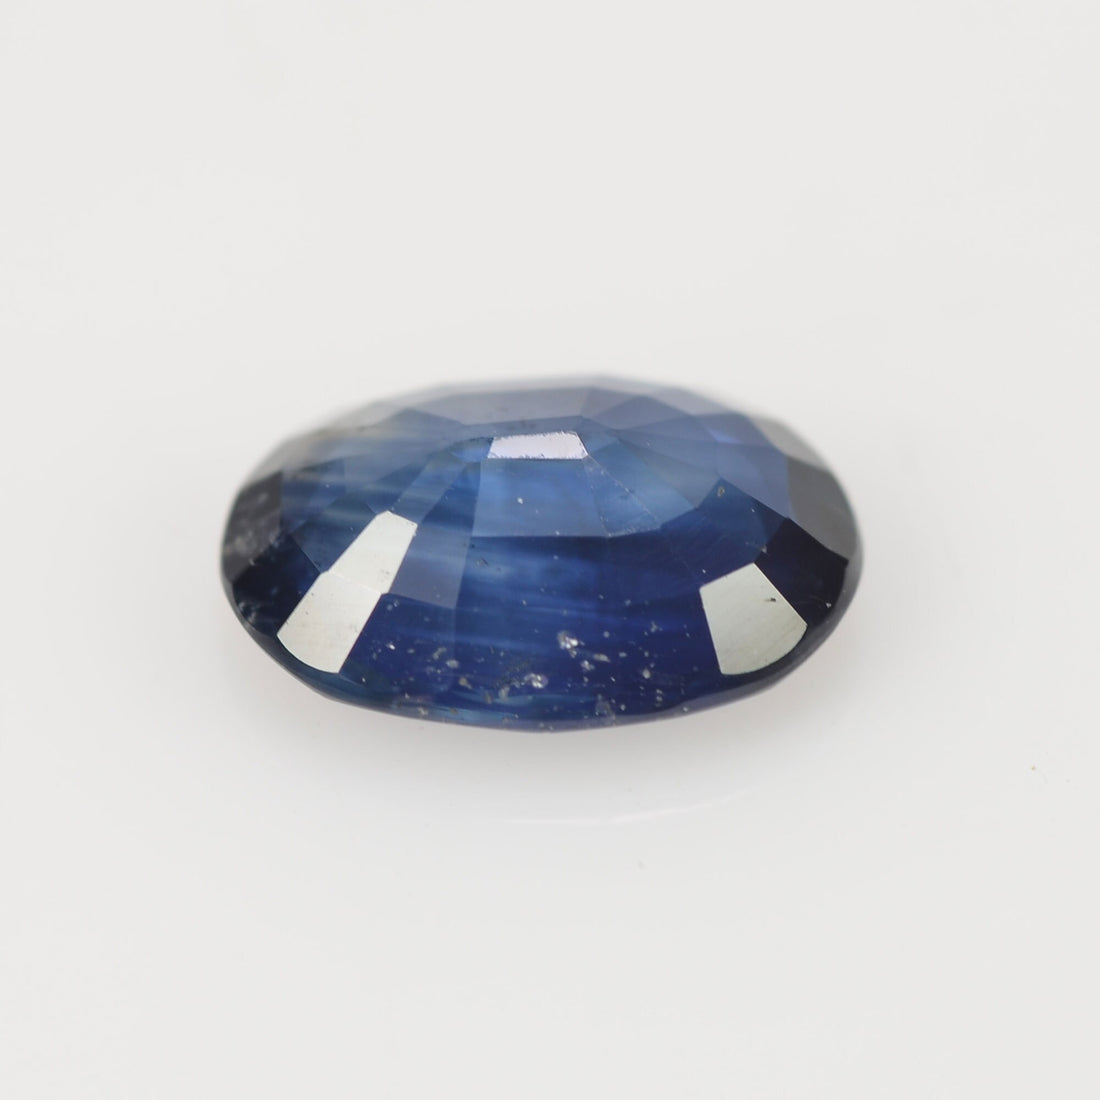 1.20 Cts Natural Blue Sapphire Loose Gemstone Oval Cut